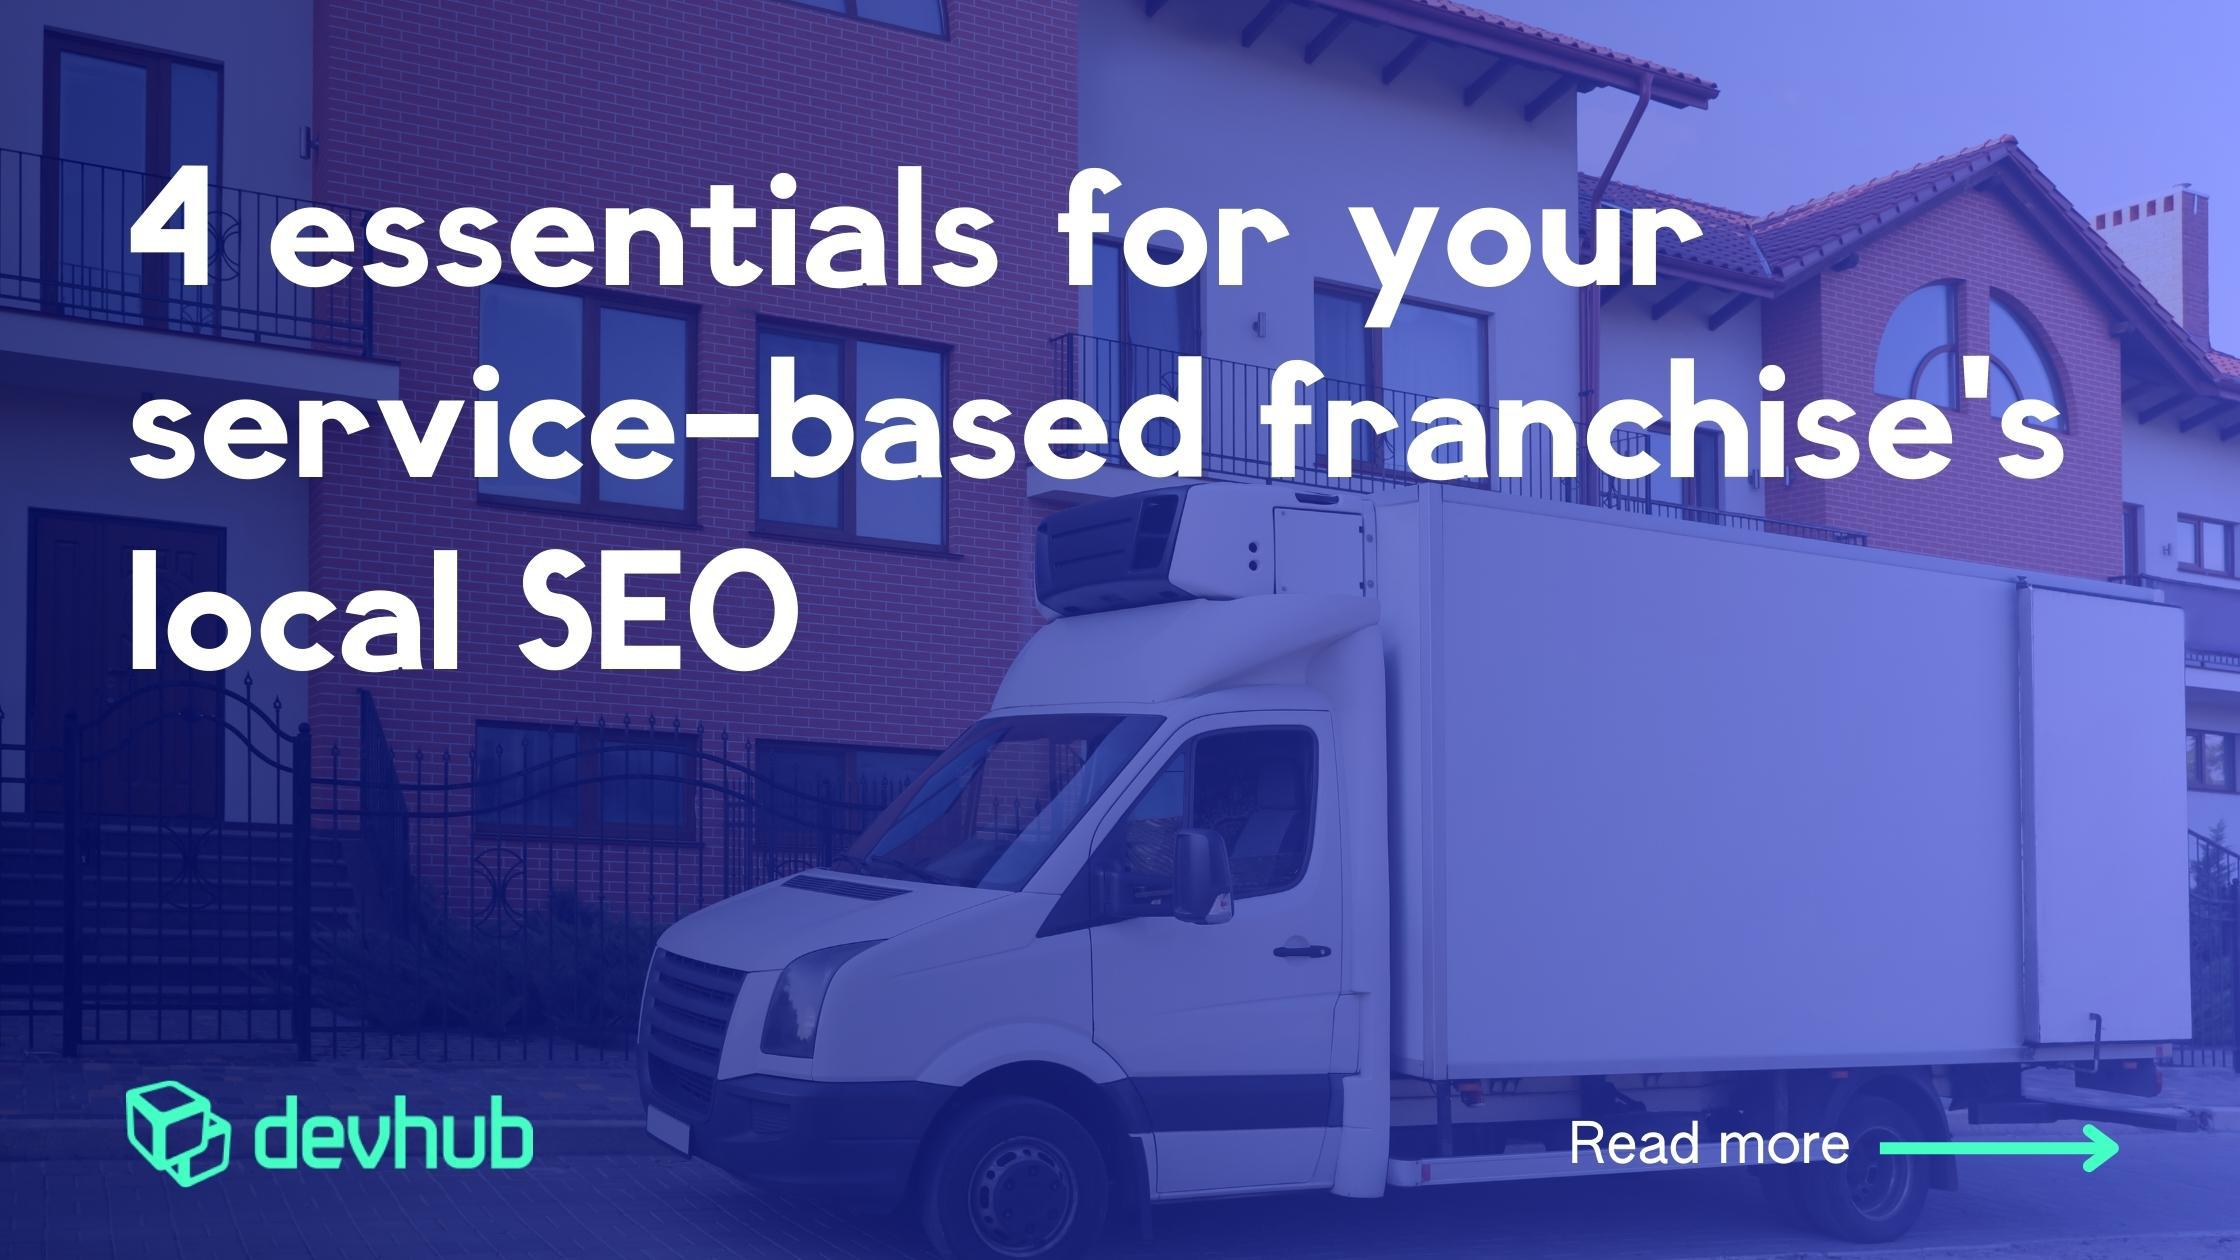 4 essentials for your service-based franchise's SEO